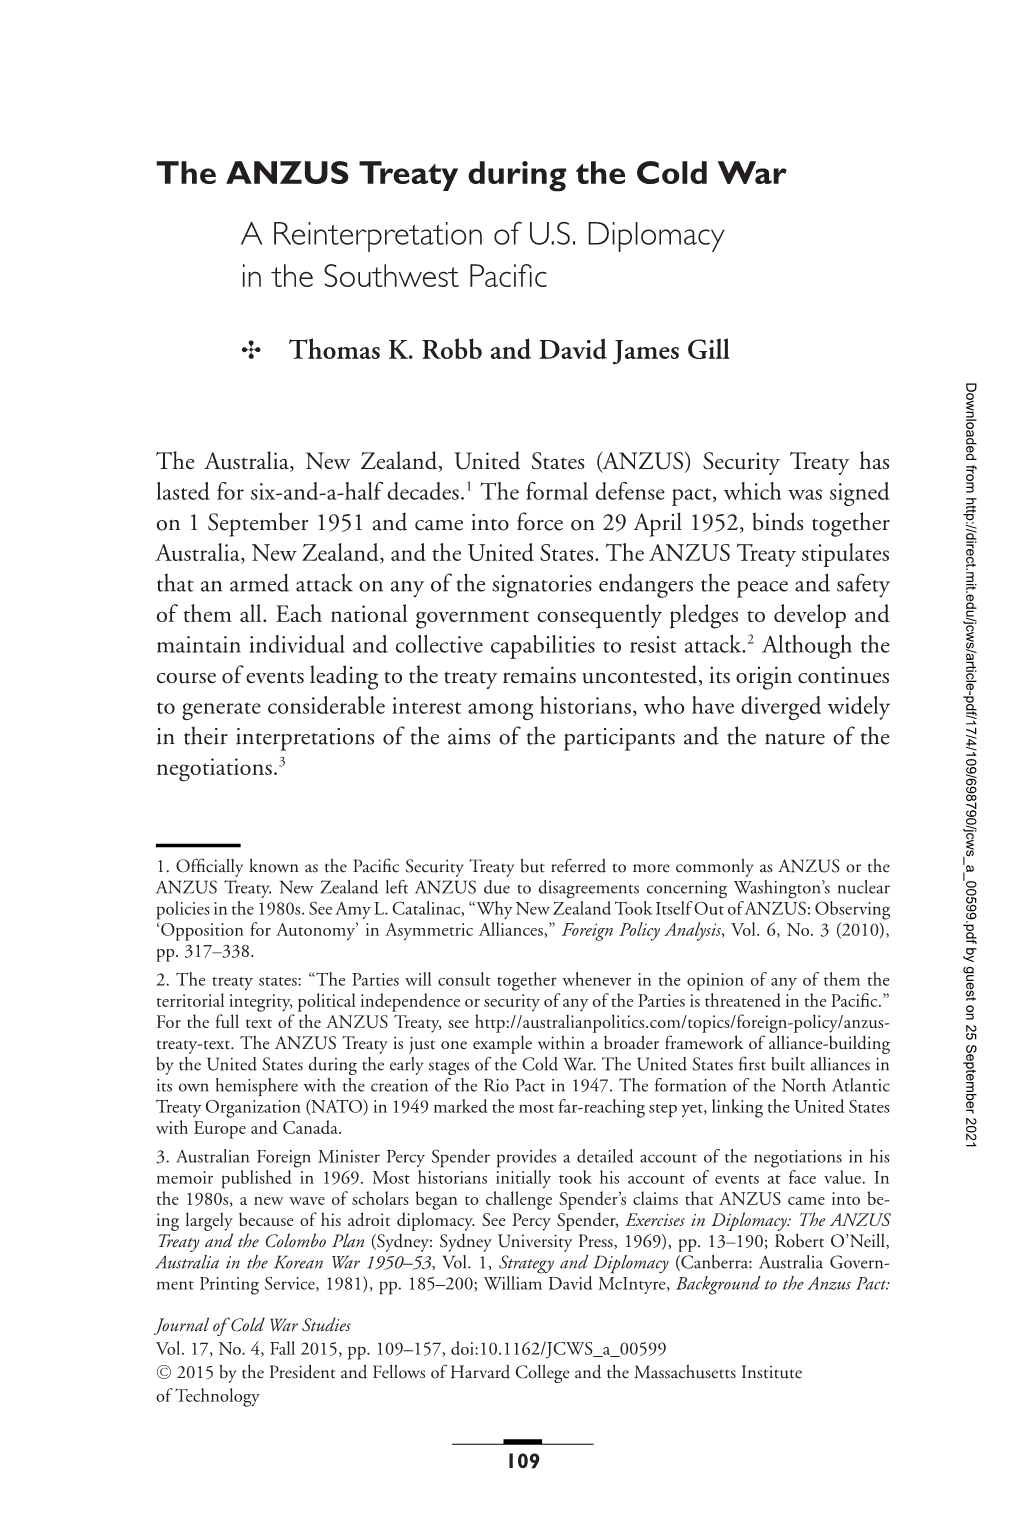 The ANZUS Treaty During the Cold War a Reinterpretation of U.S. Diplomacy in the Southwest Paciﬁc